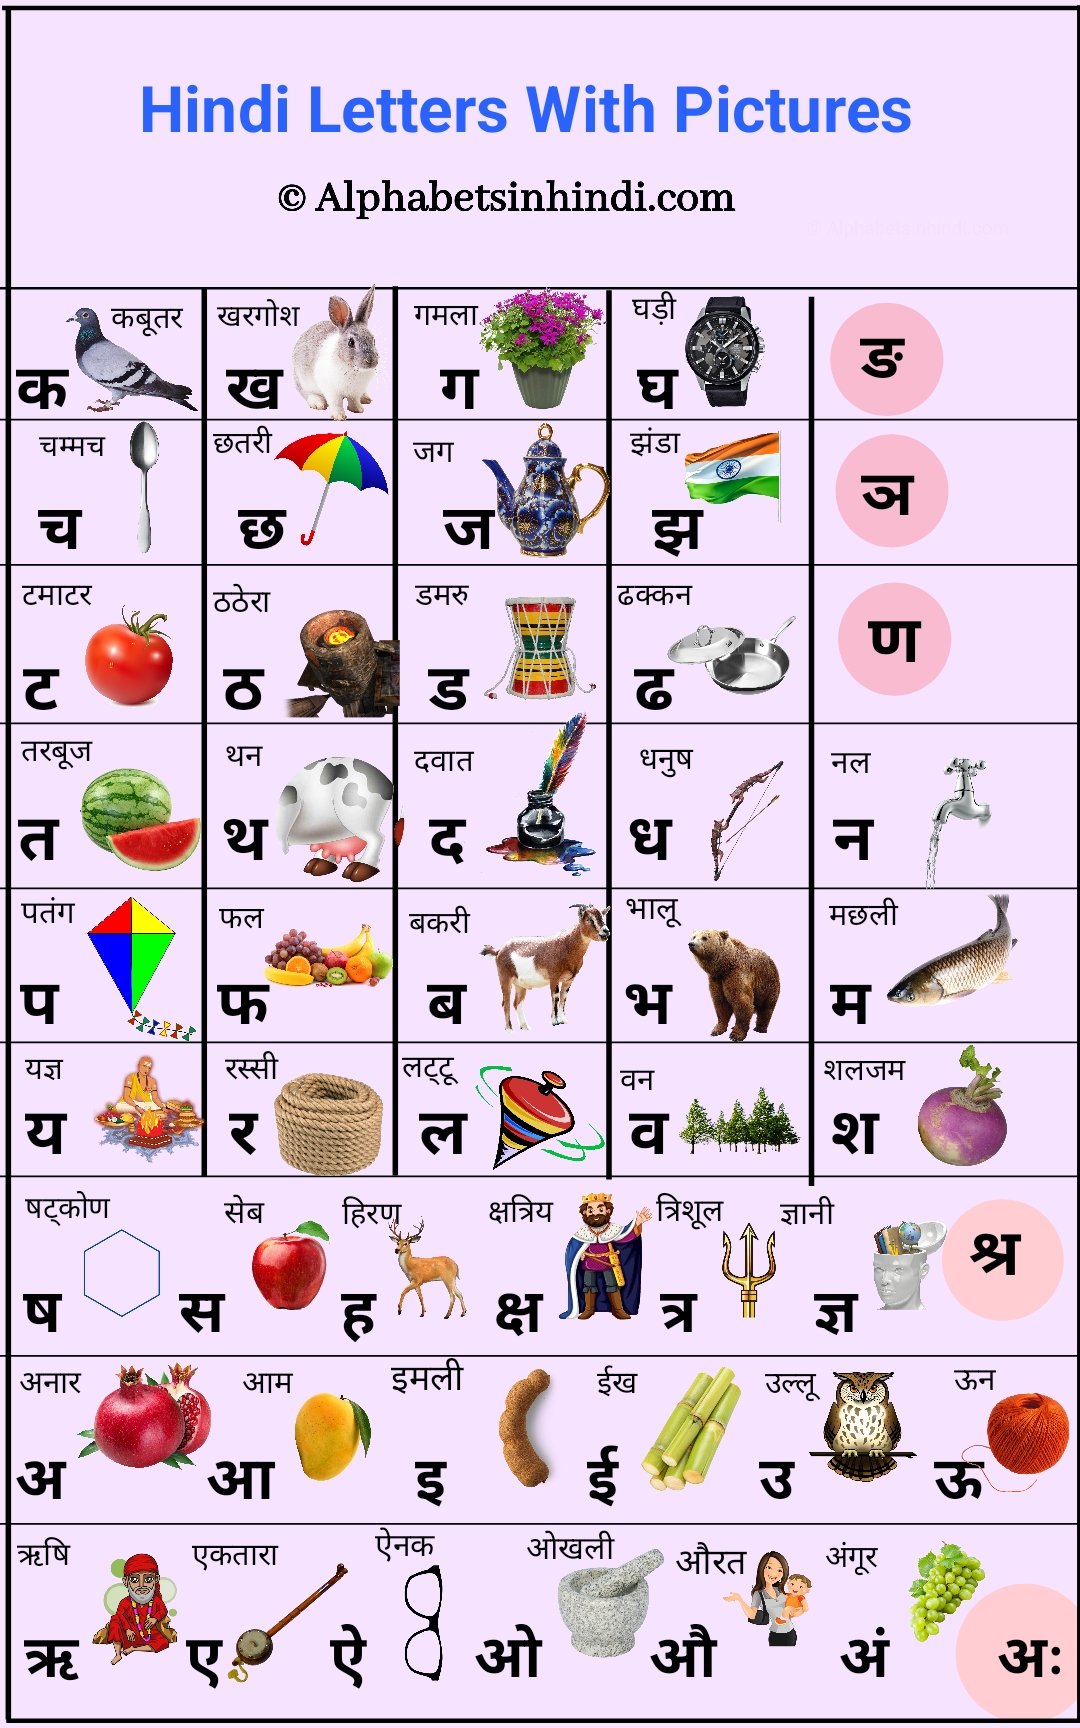 Hindi Letters With Pictures